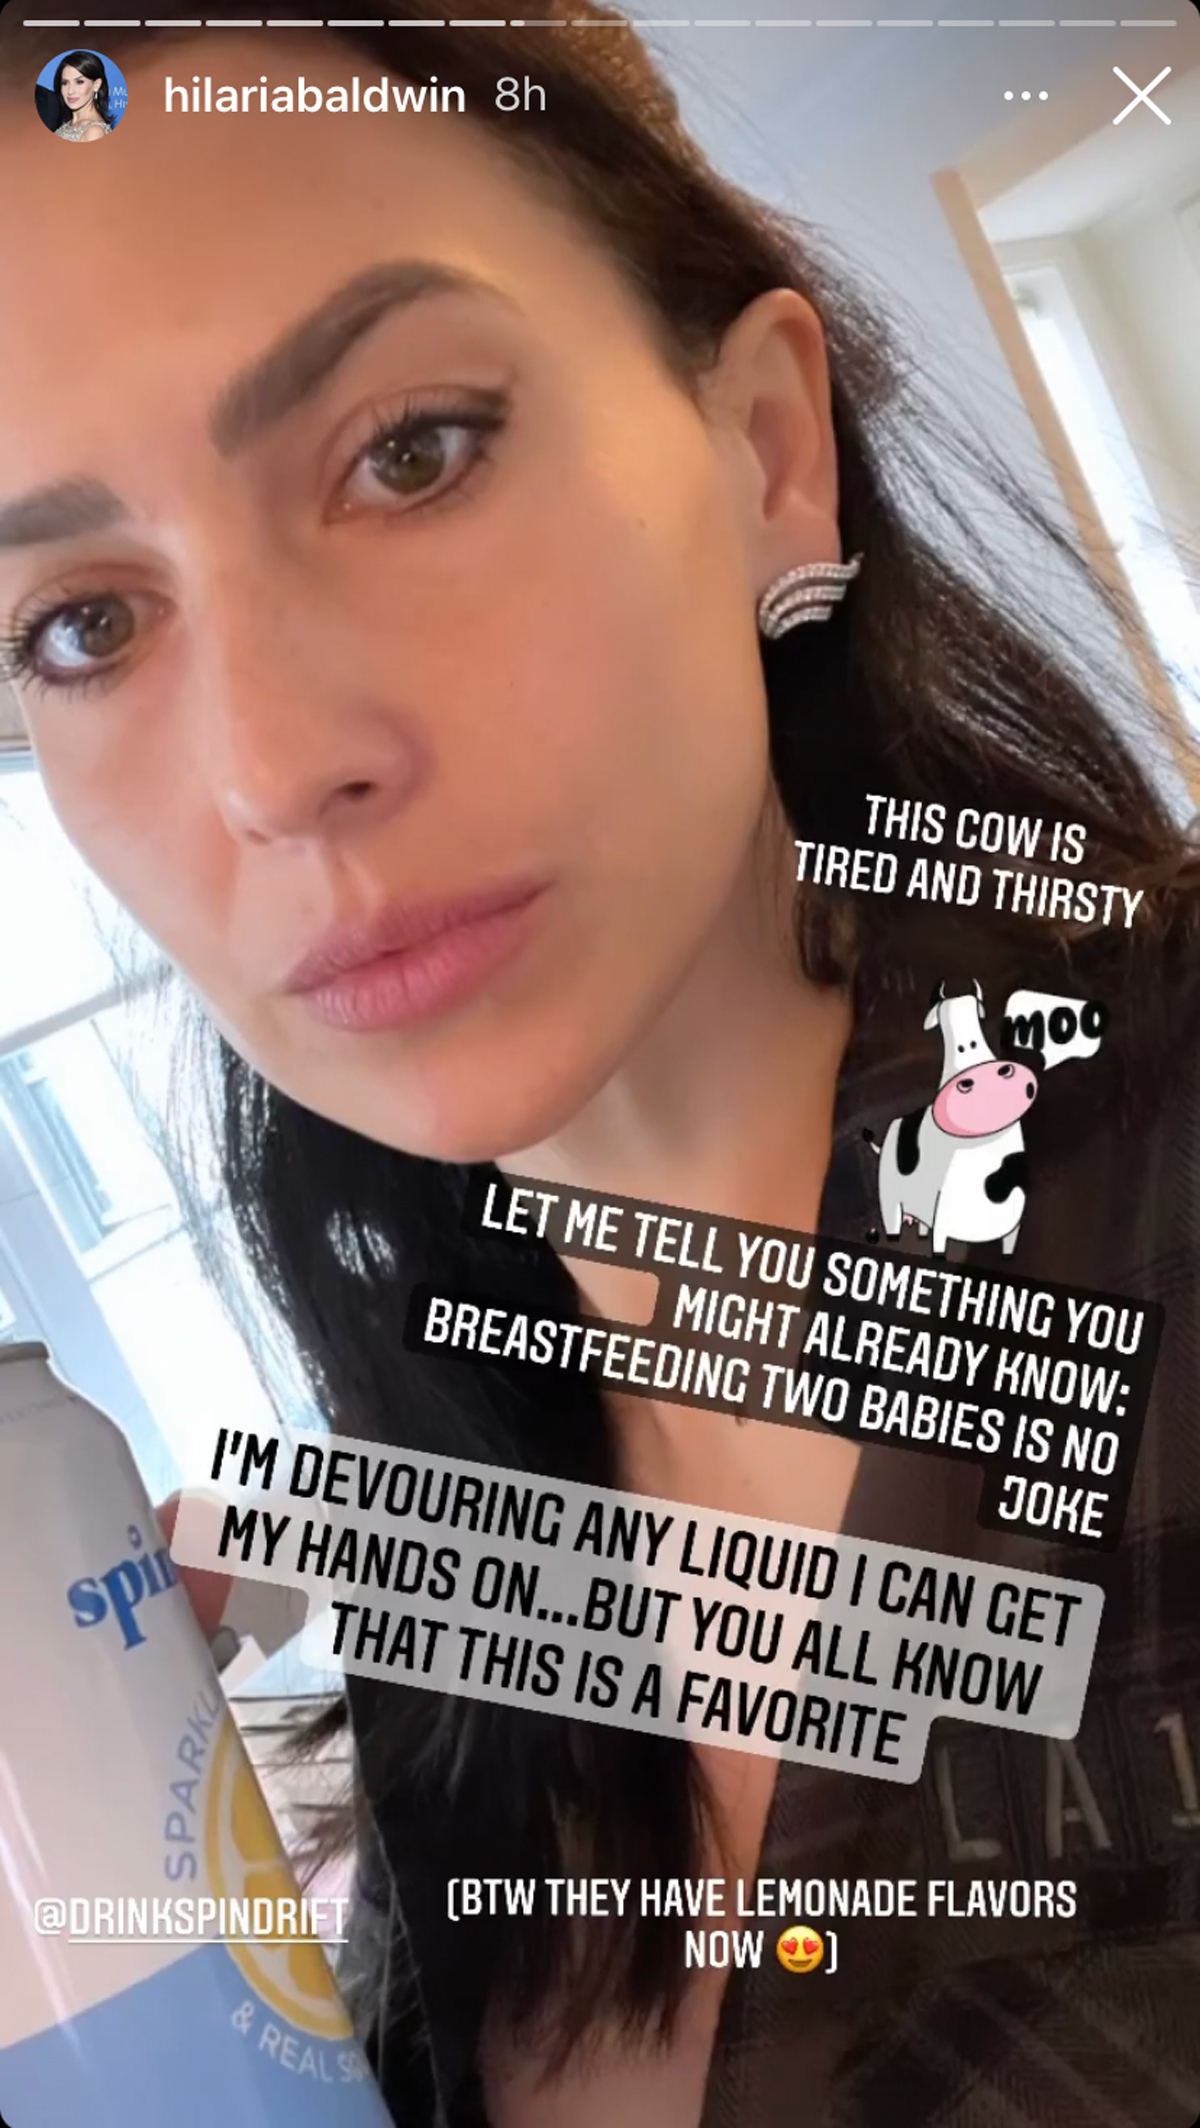 Hilaria Baldwin Opens Up About Breastfeeding Two Babies: ‘This Cow Is Tired And Thirsty’ 